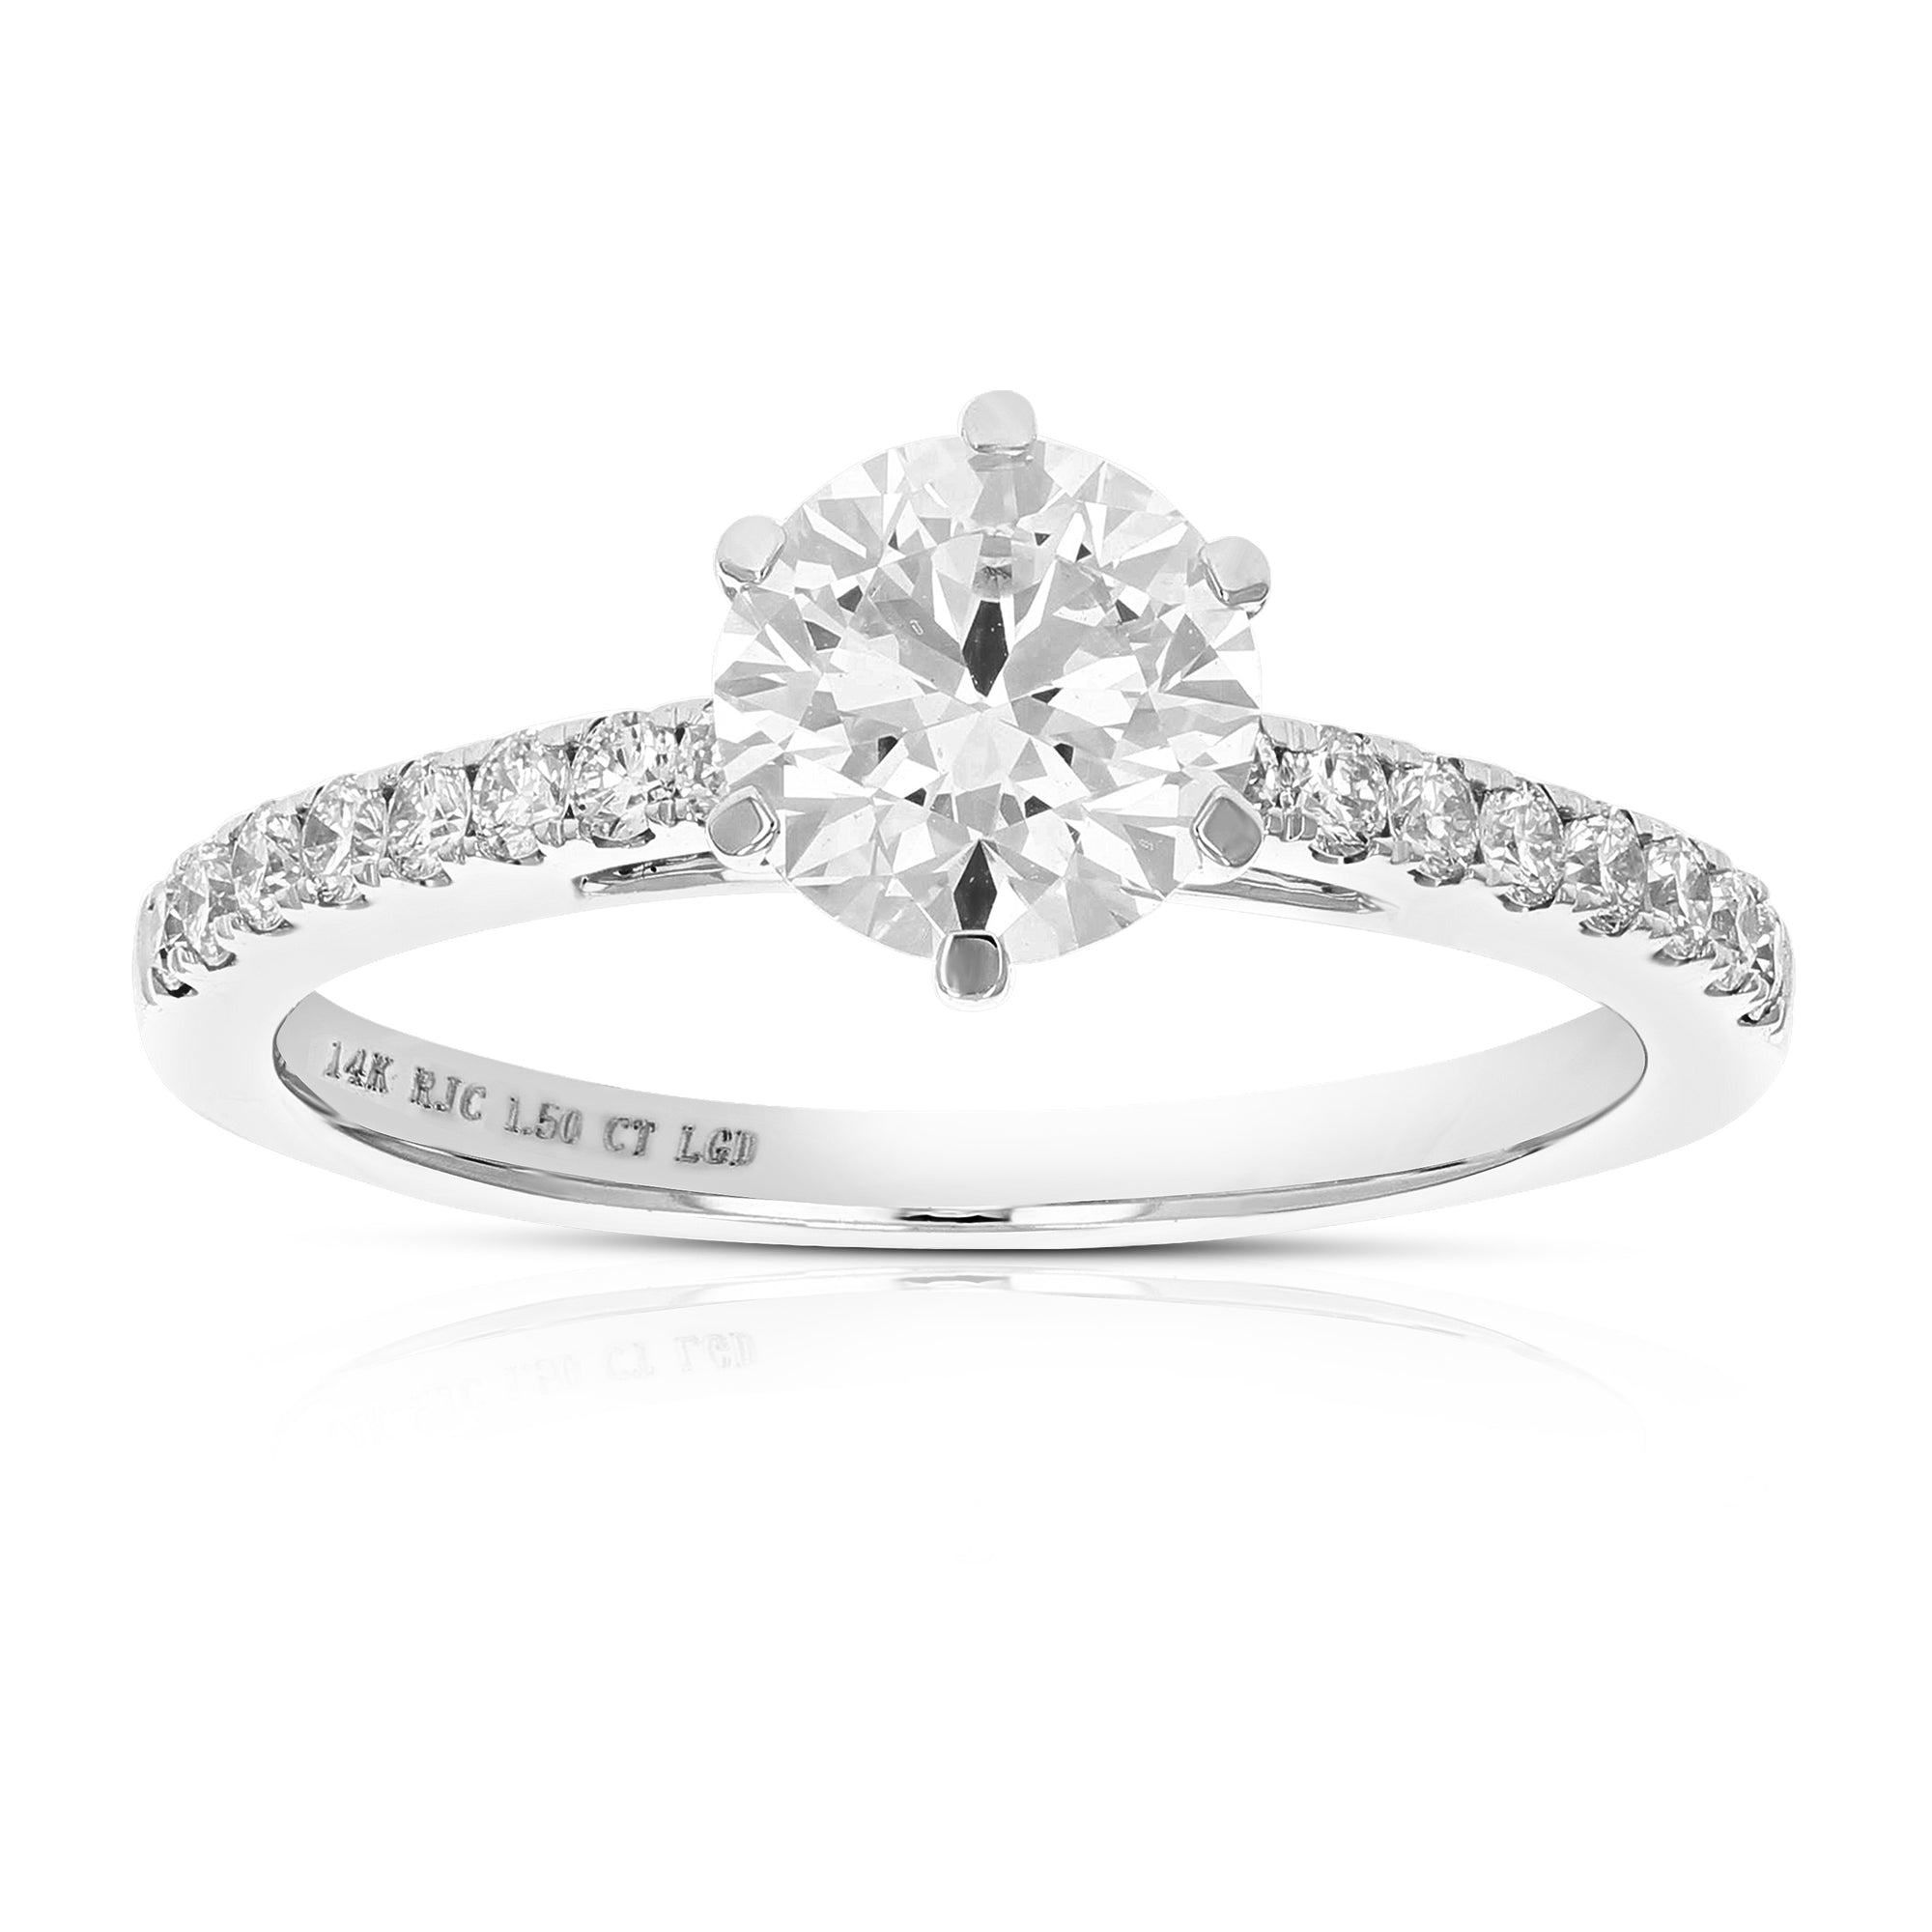 1.50 cttw Wedding Engagement Ring for Women, Round Lab Grown Diamond Ring in 14K White Gold, Prong Setting